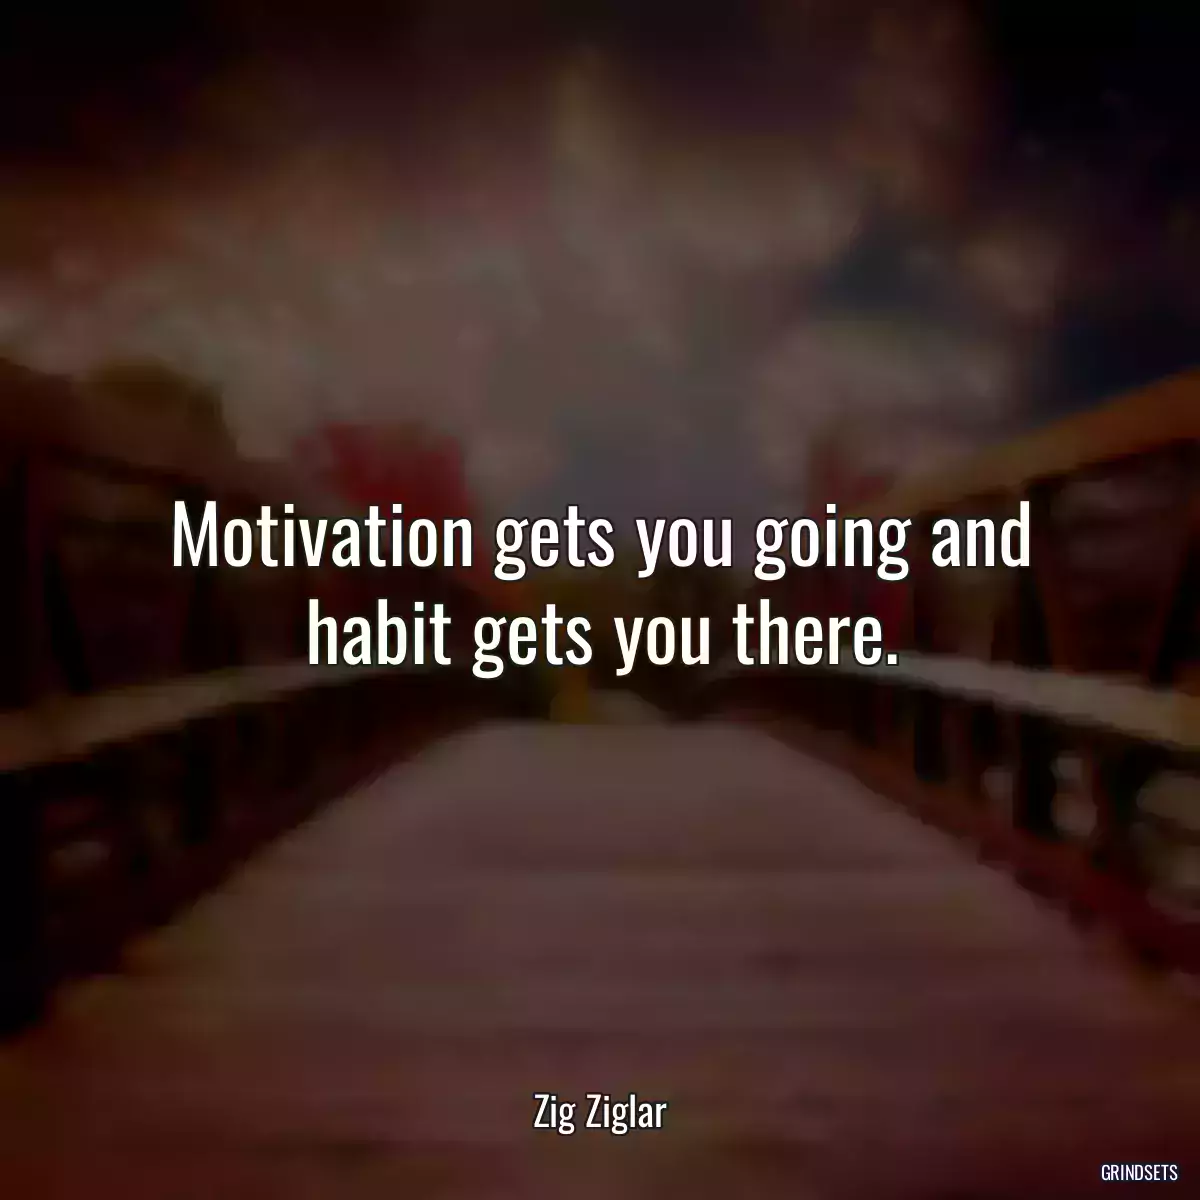 Motivation gets you going and habit gets you there.